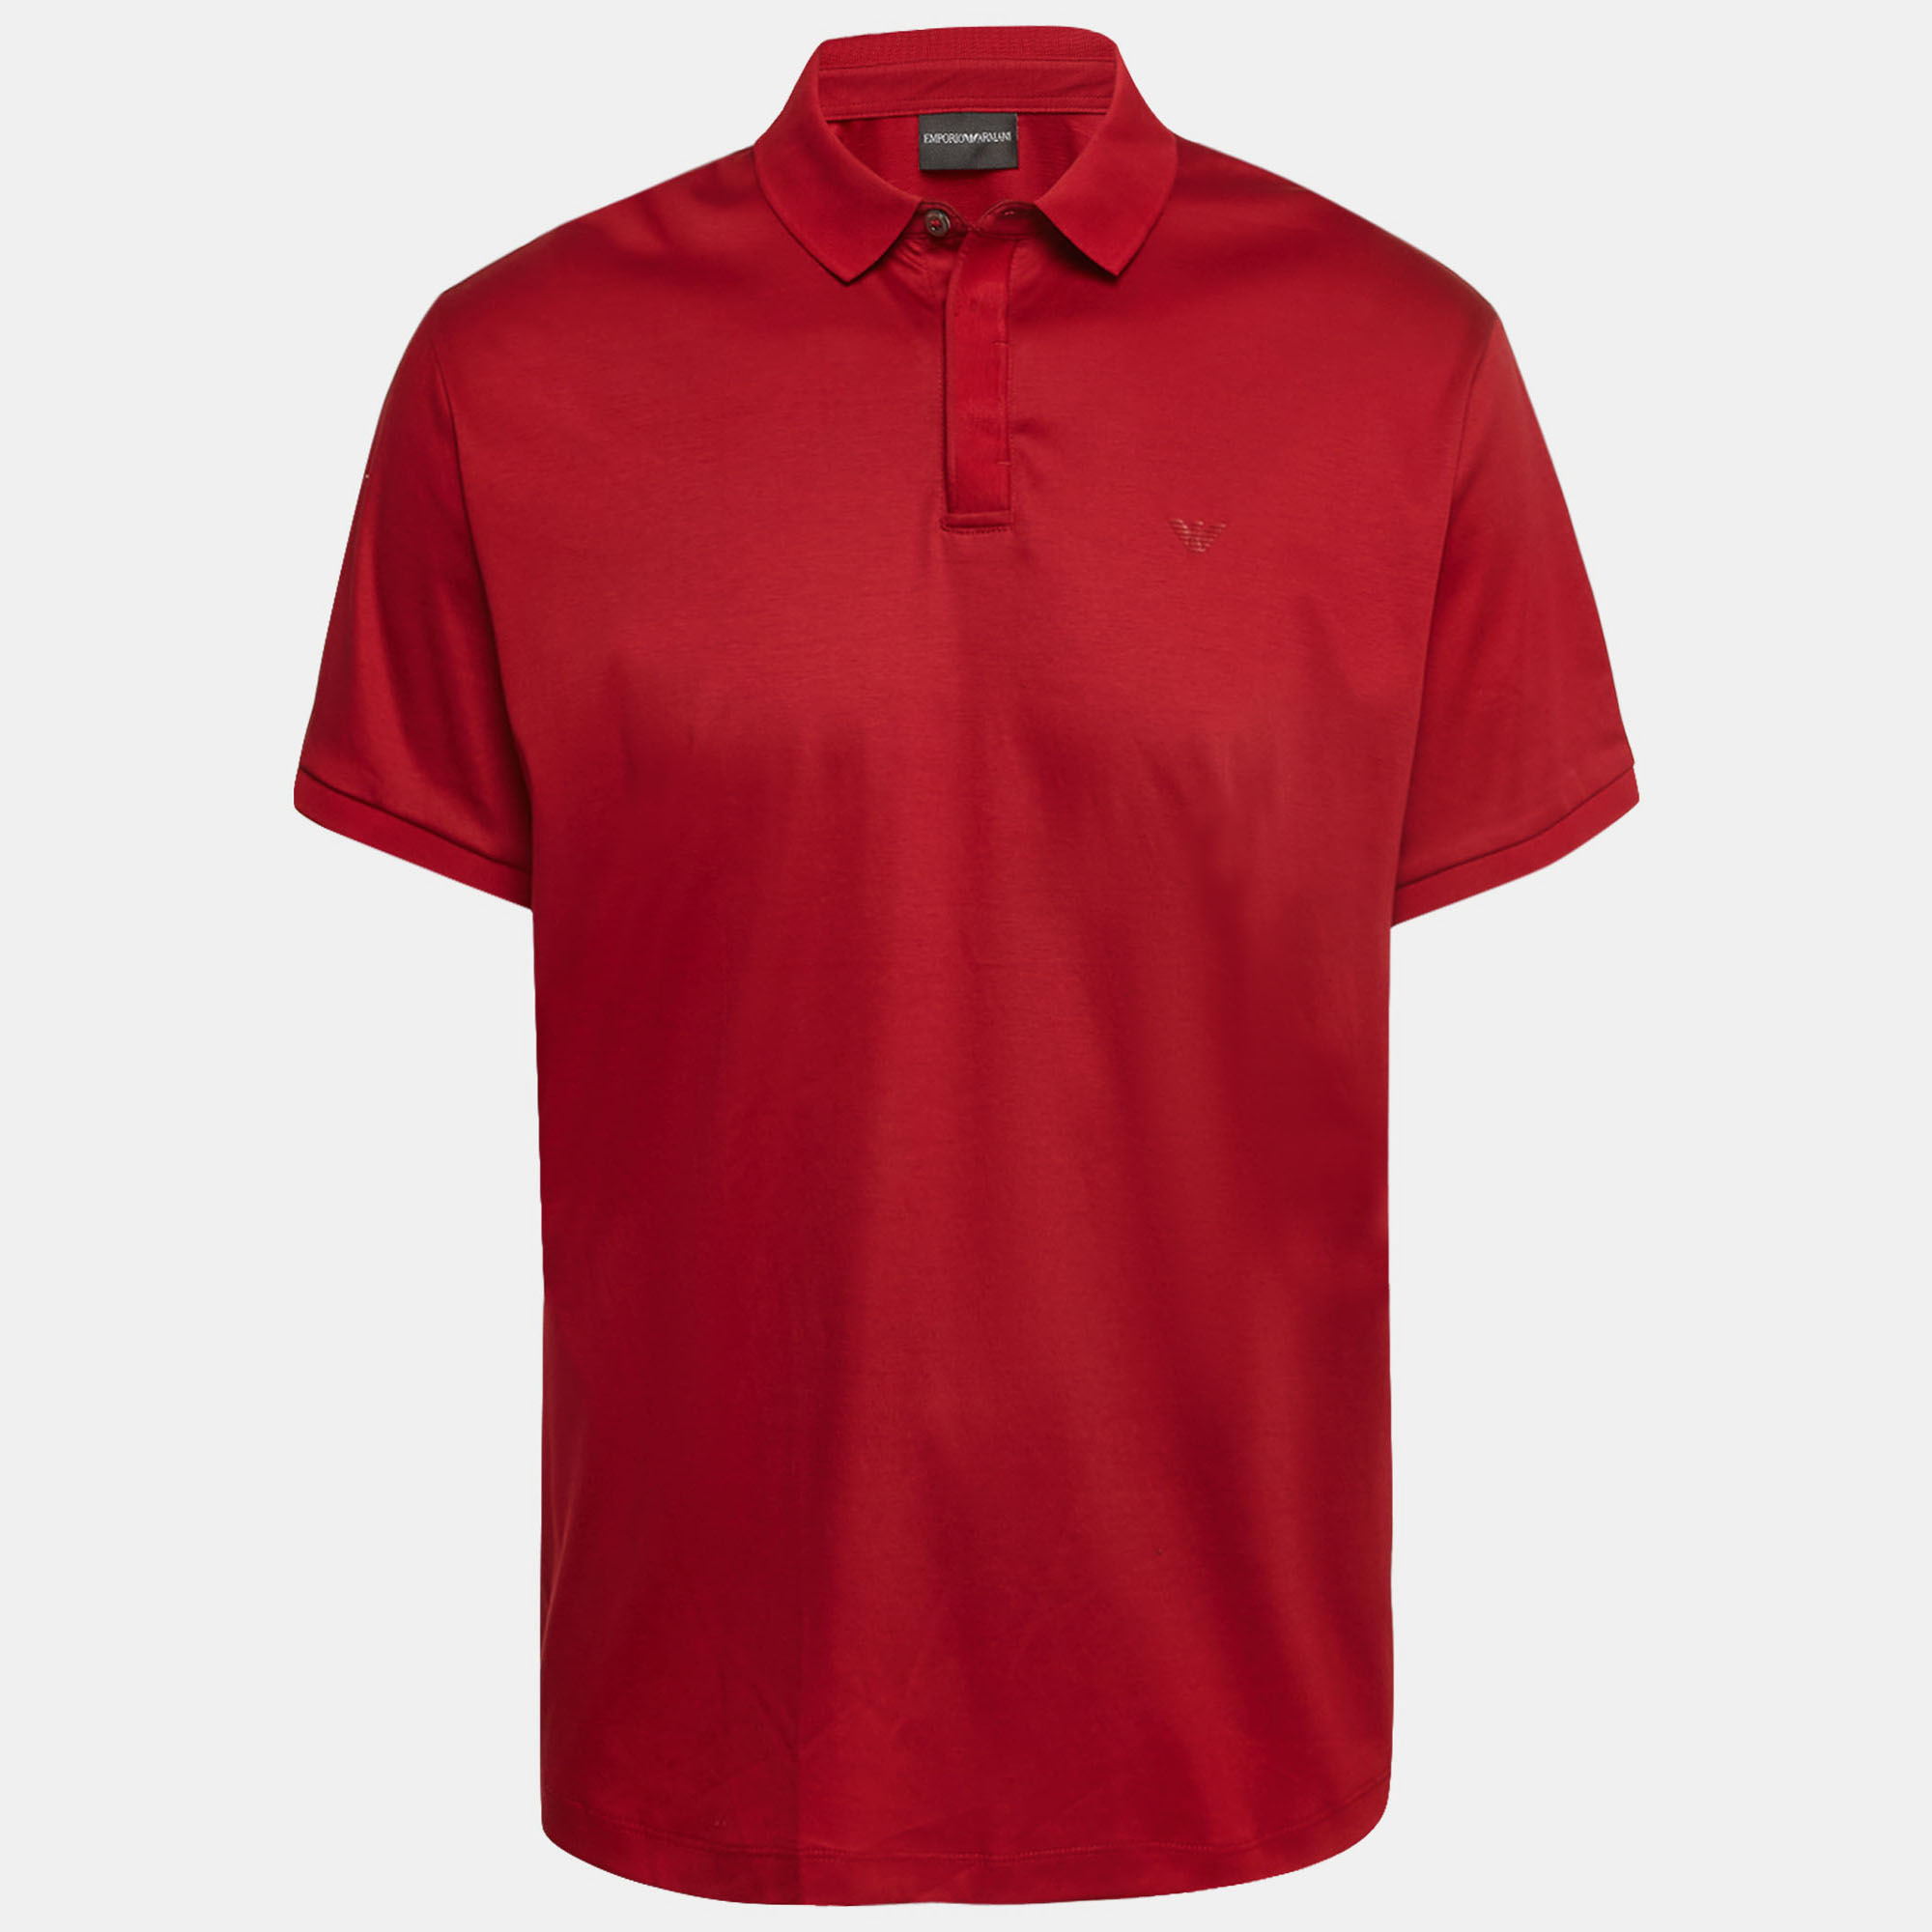 Pre-owned Emporio Armani Red Cotton Knit Polo T-shirt Xxl